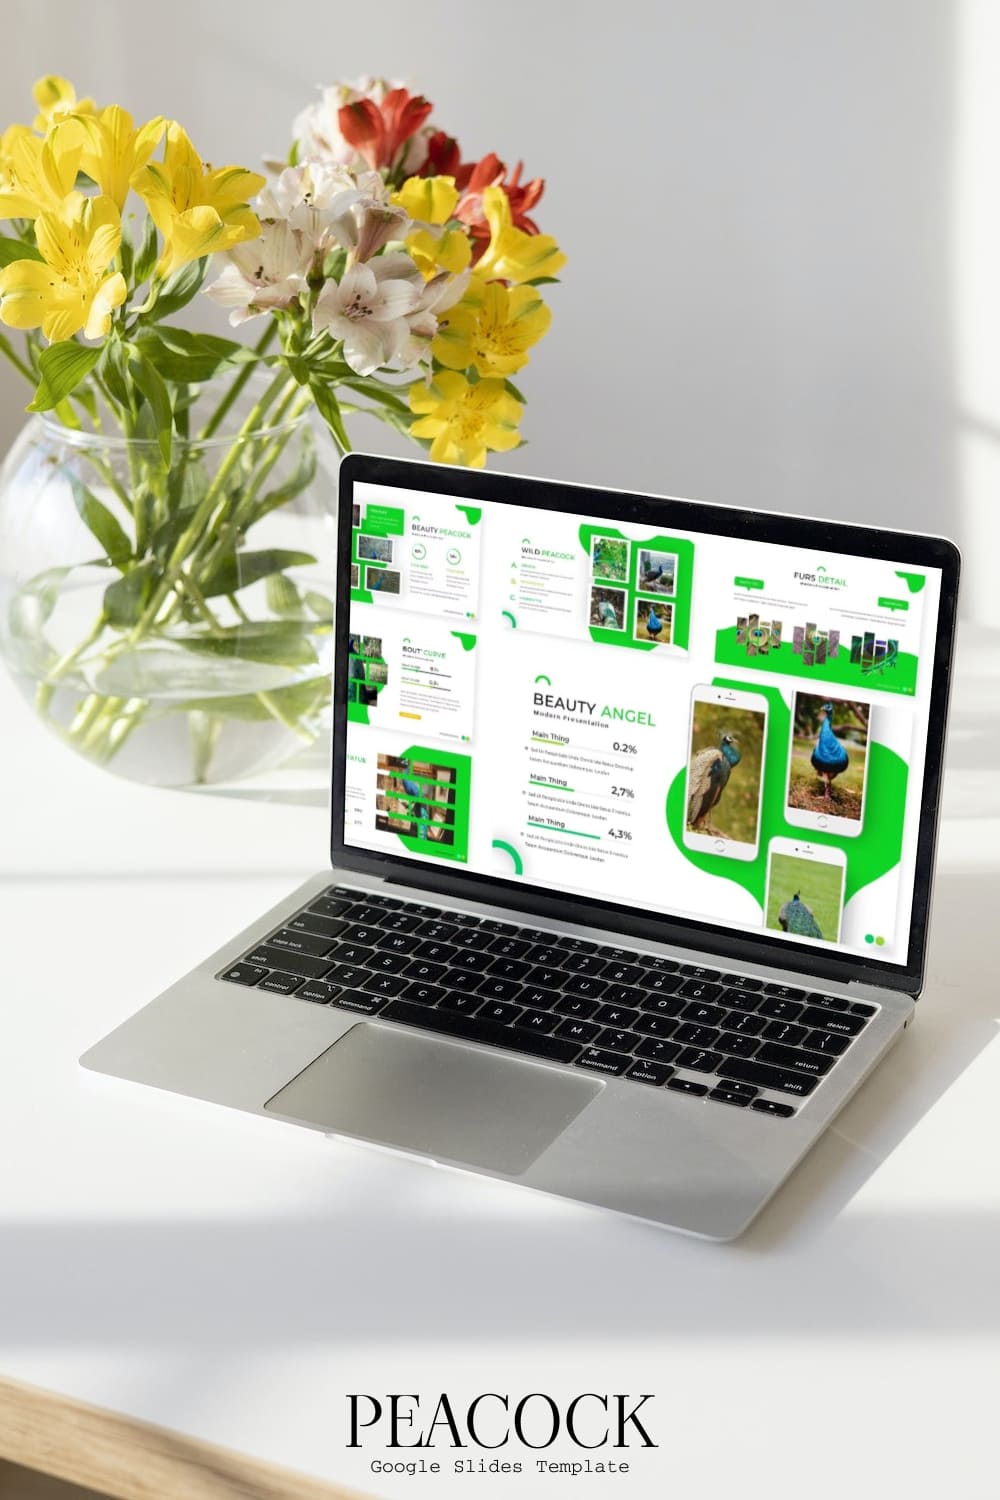 Collection of images of enchanting presentation template slides in green color on laptop screen.